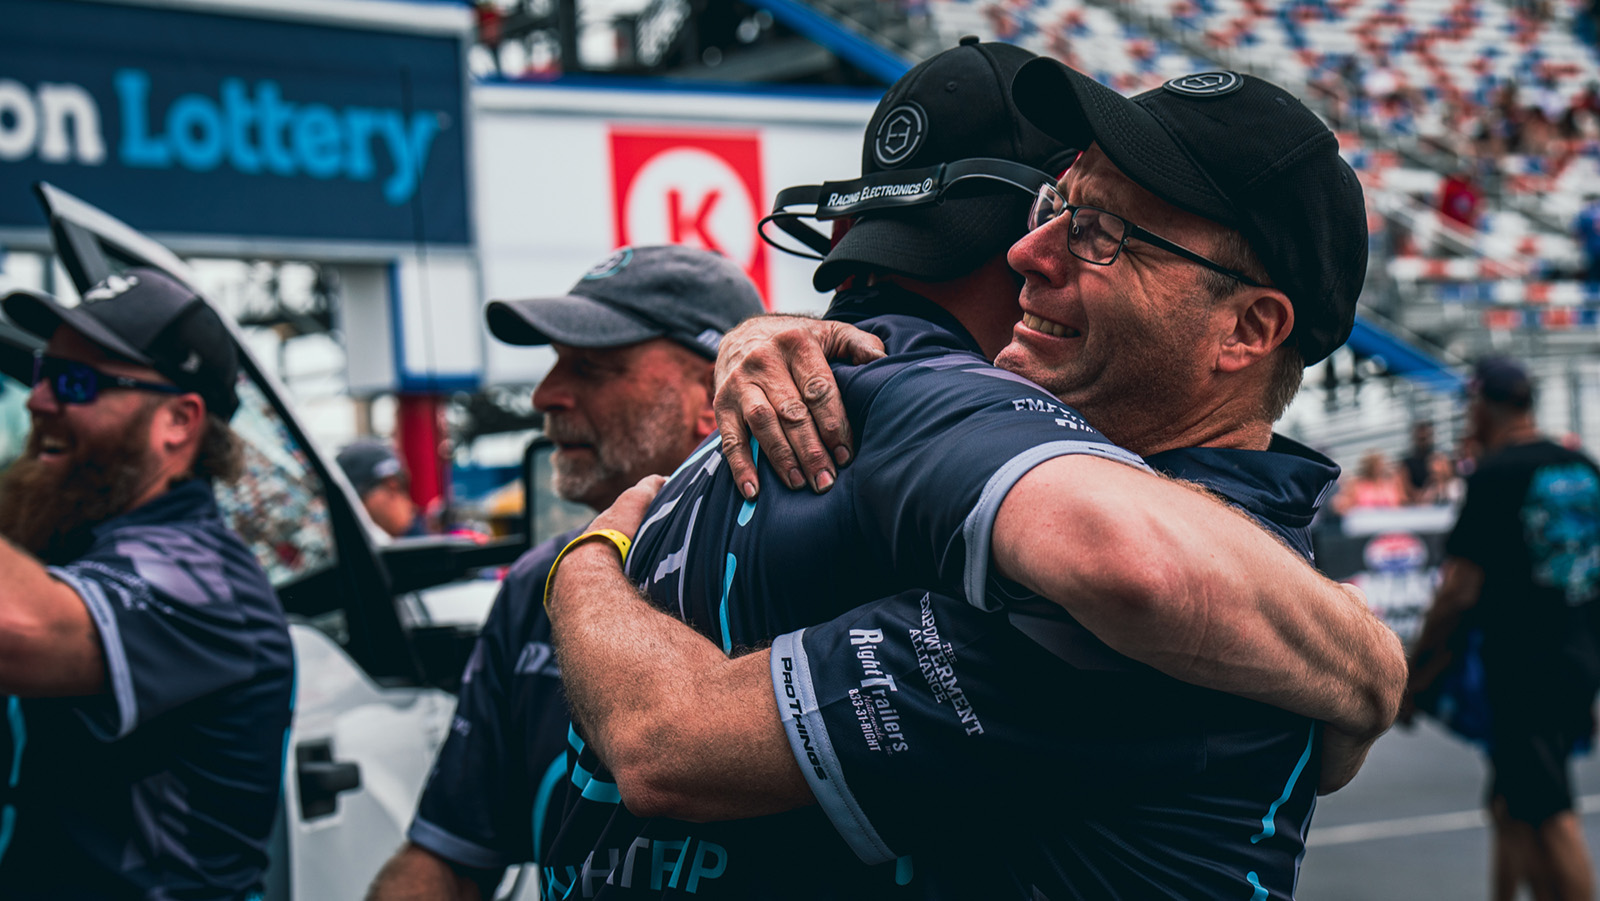 The 2022 NHRA Four-Wide Nationals victory for Michalek Brothers Racing was the first NHRA national event win for MBR as car owners as well as the first national event win for several of the team's crew members.